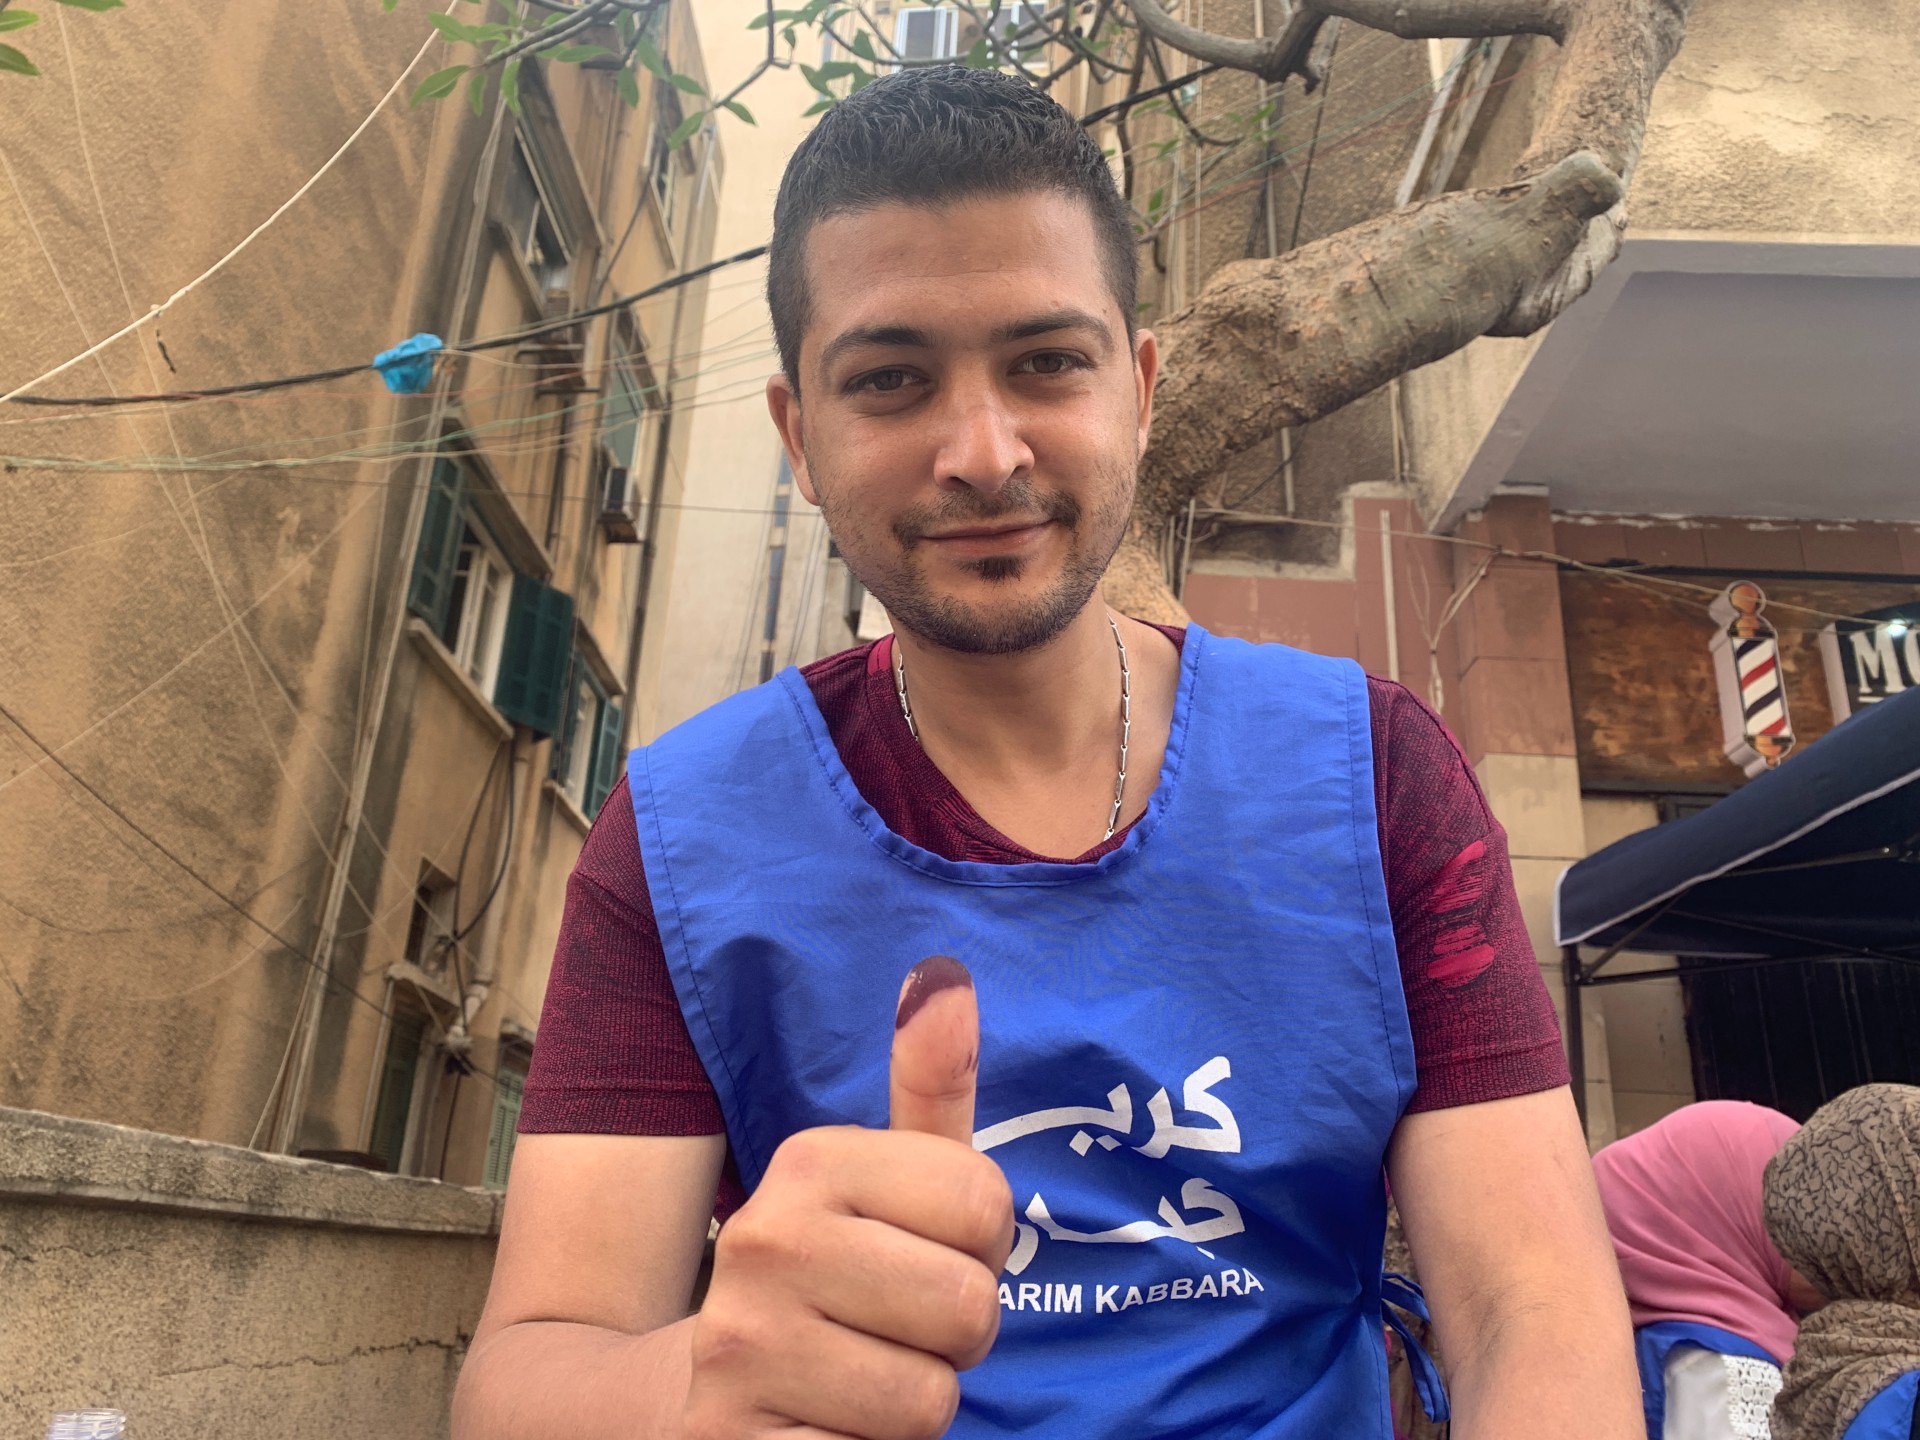 Mohammed, 30, voted for “The People’s Will”, the party supported by former members of Hariri’s Future Movement (MEE/Dario Sabaghi)